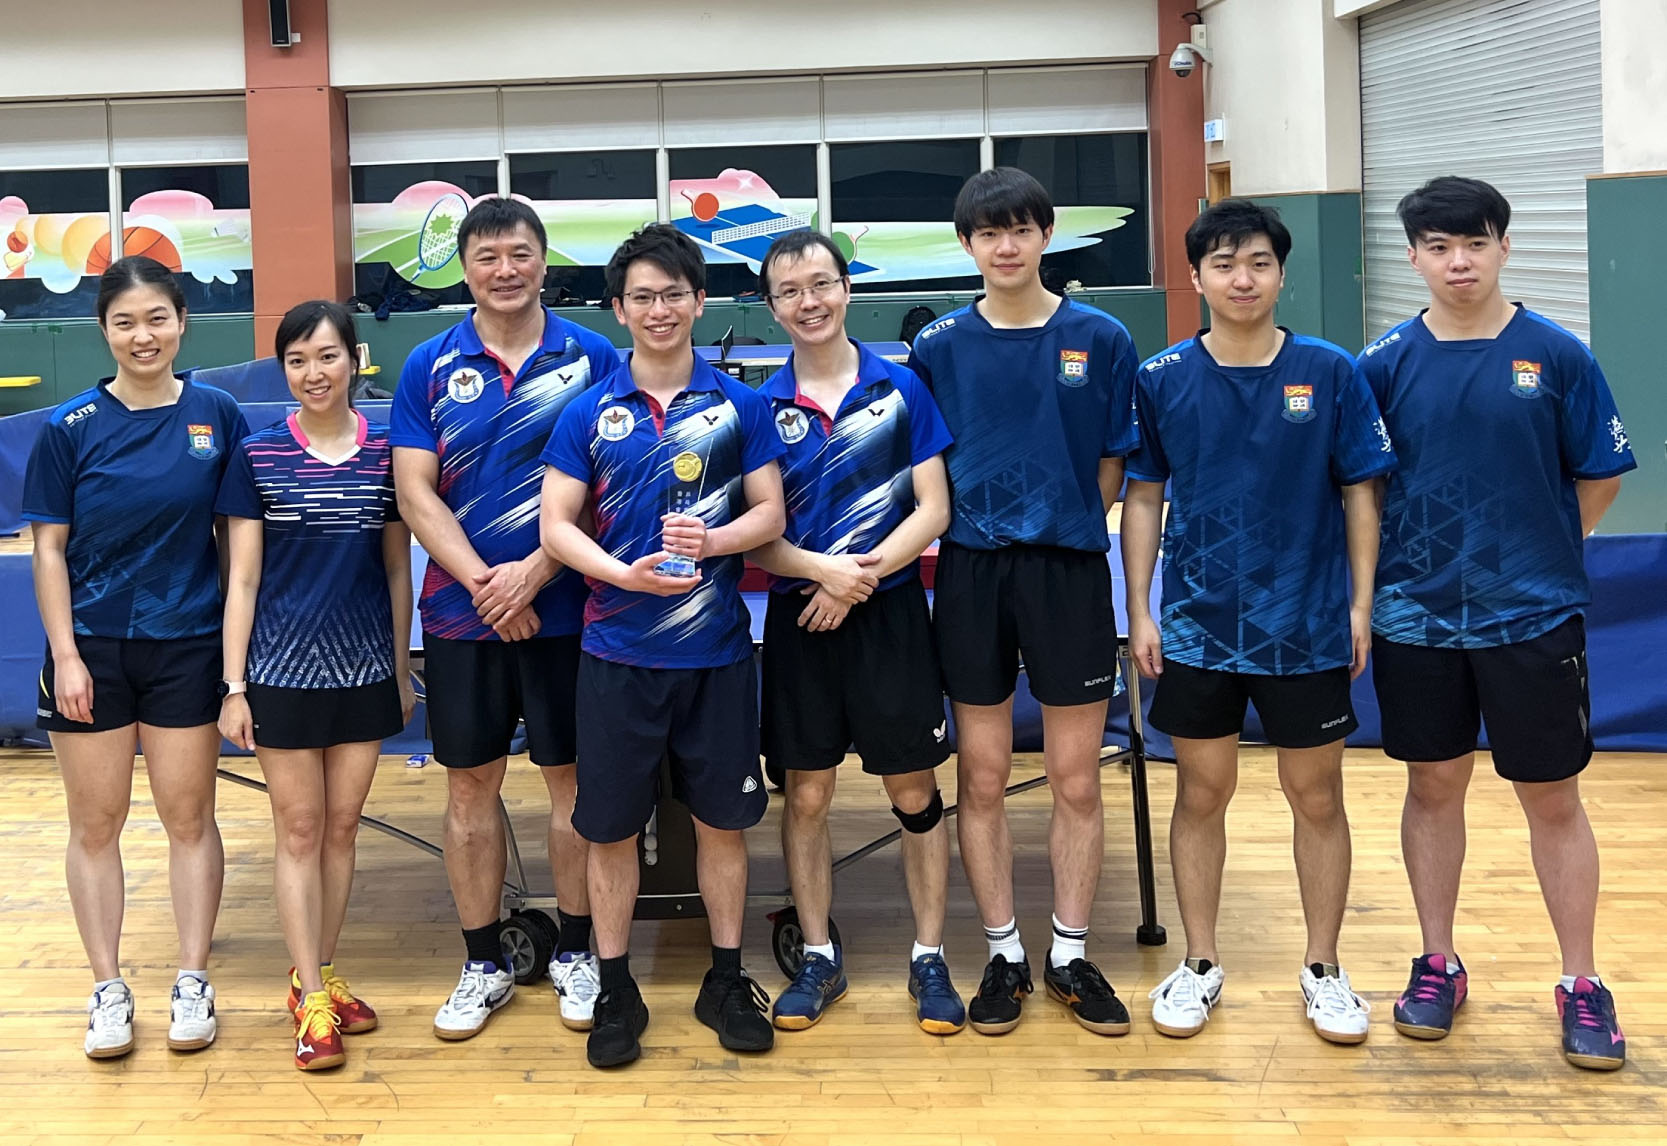 BDS Students Joined HKDA to Compete in Table Tennis Match